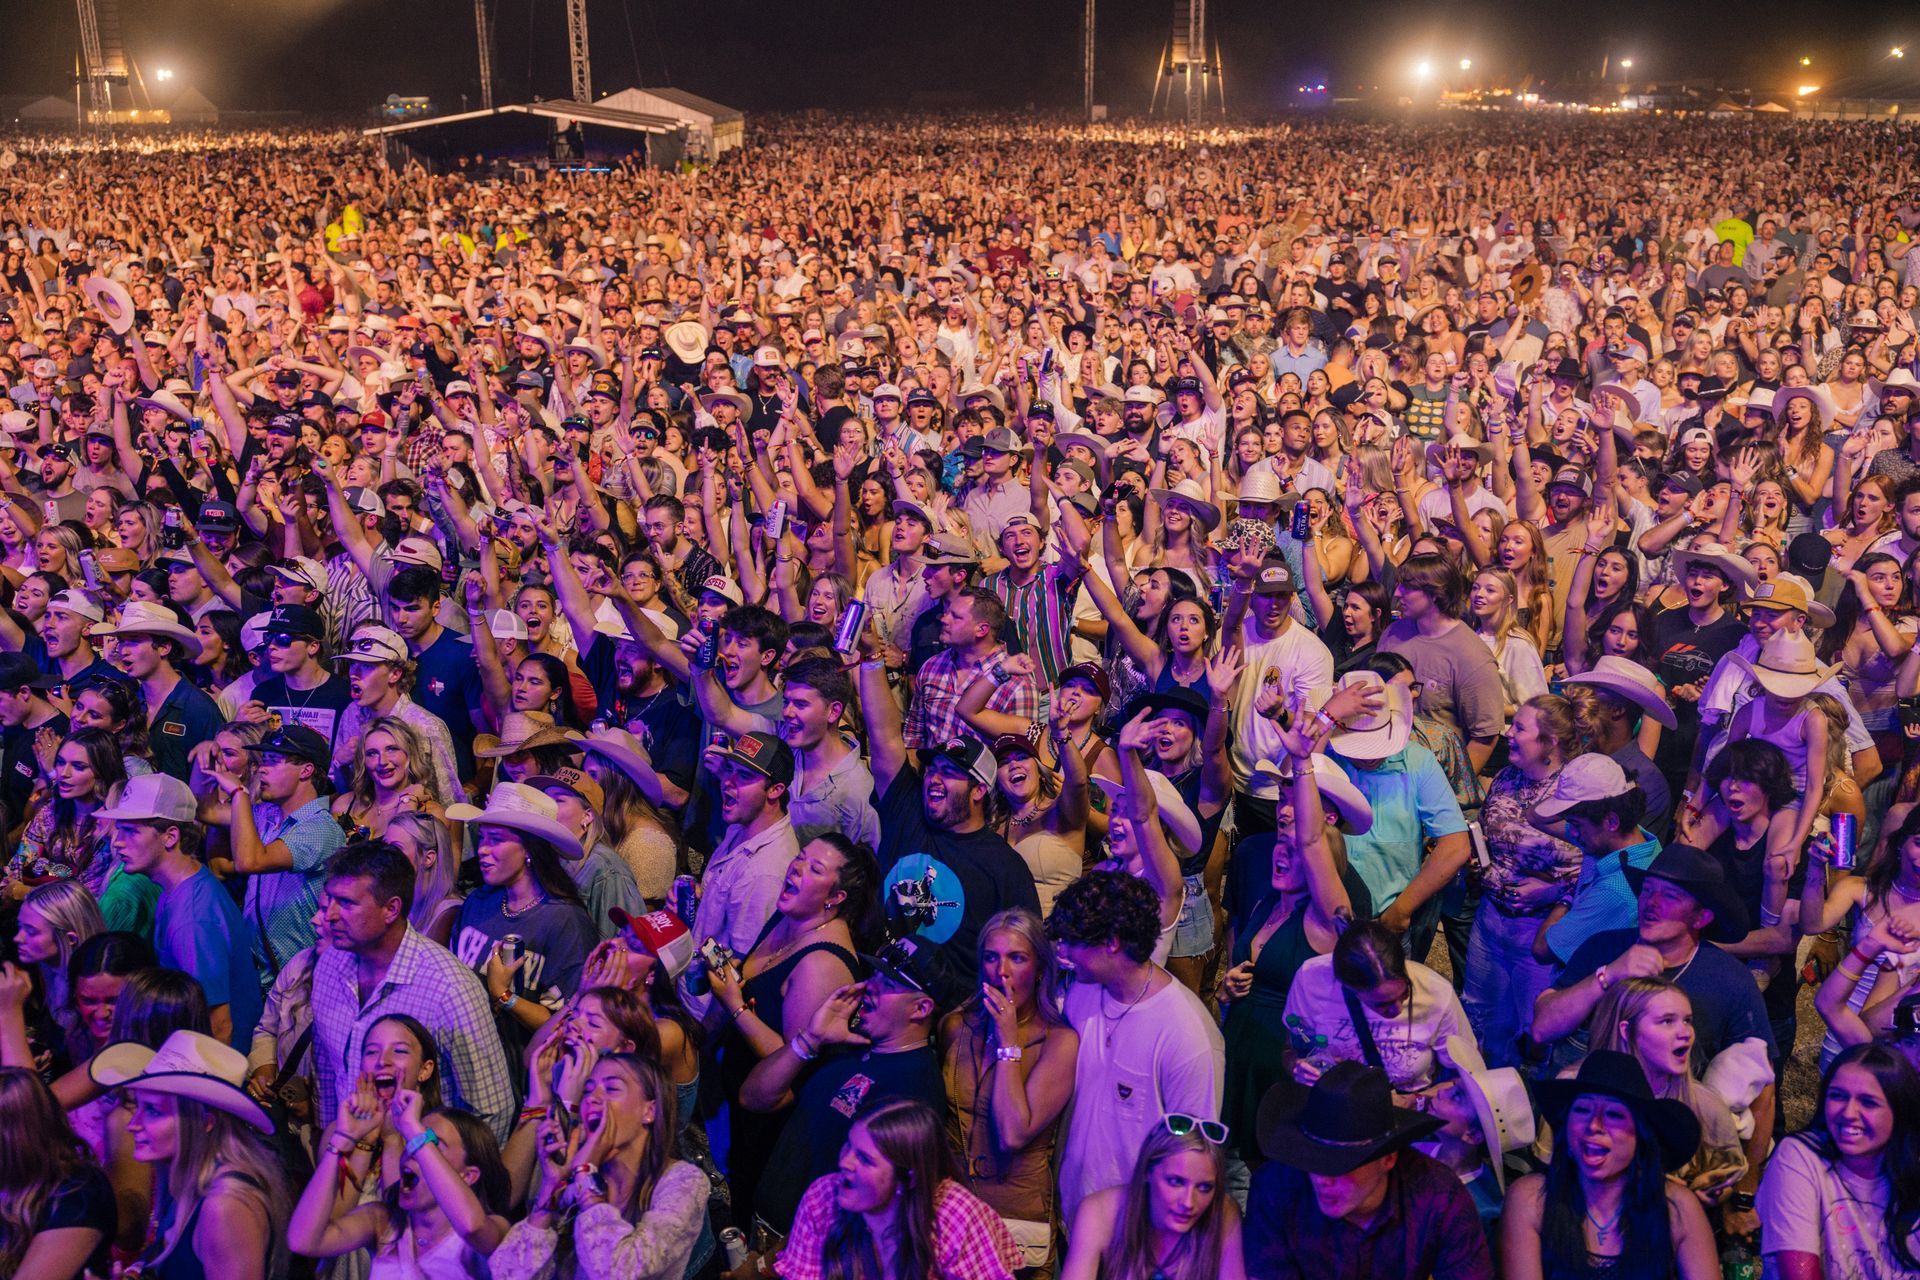 A large crowd of people are standing in a field at a concert.